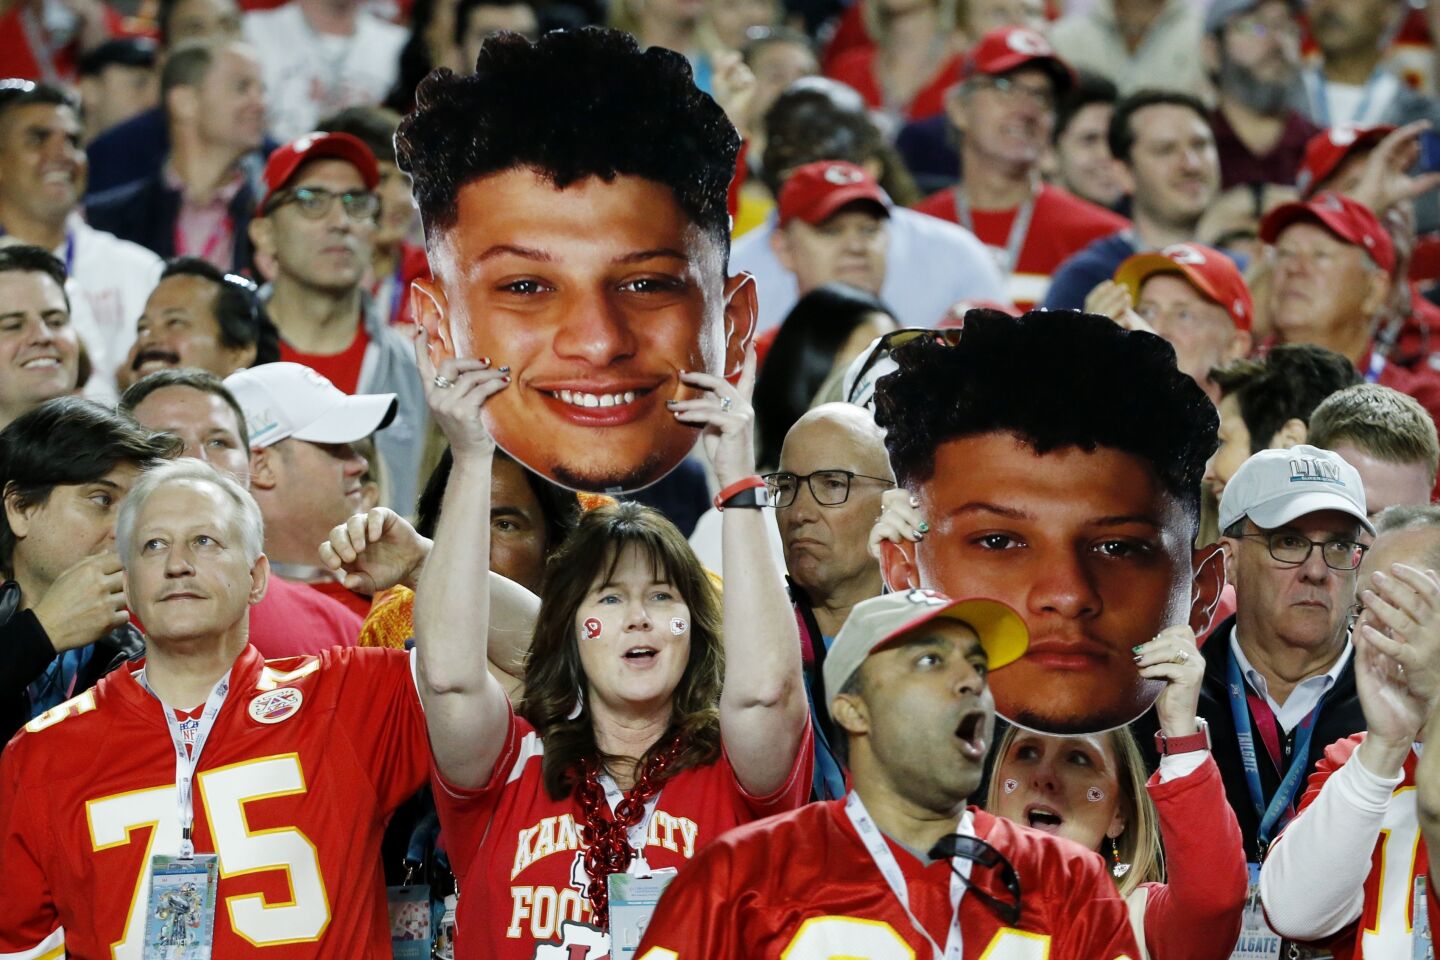 Kansas City Chiefs fans cheer during the first half of the NFL Super Bowl LIV against the San Francisco 49ers.